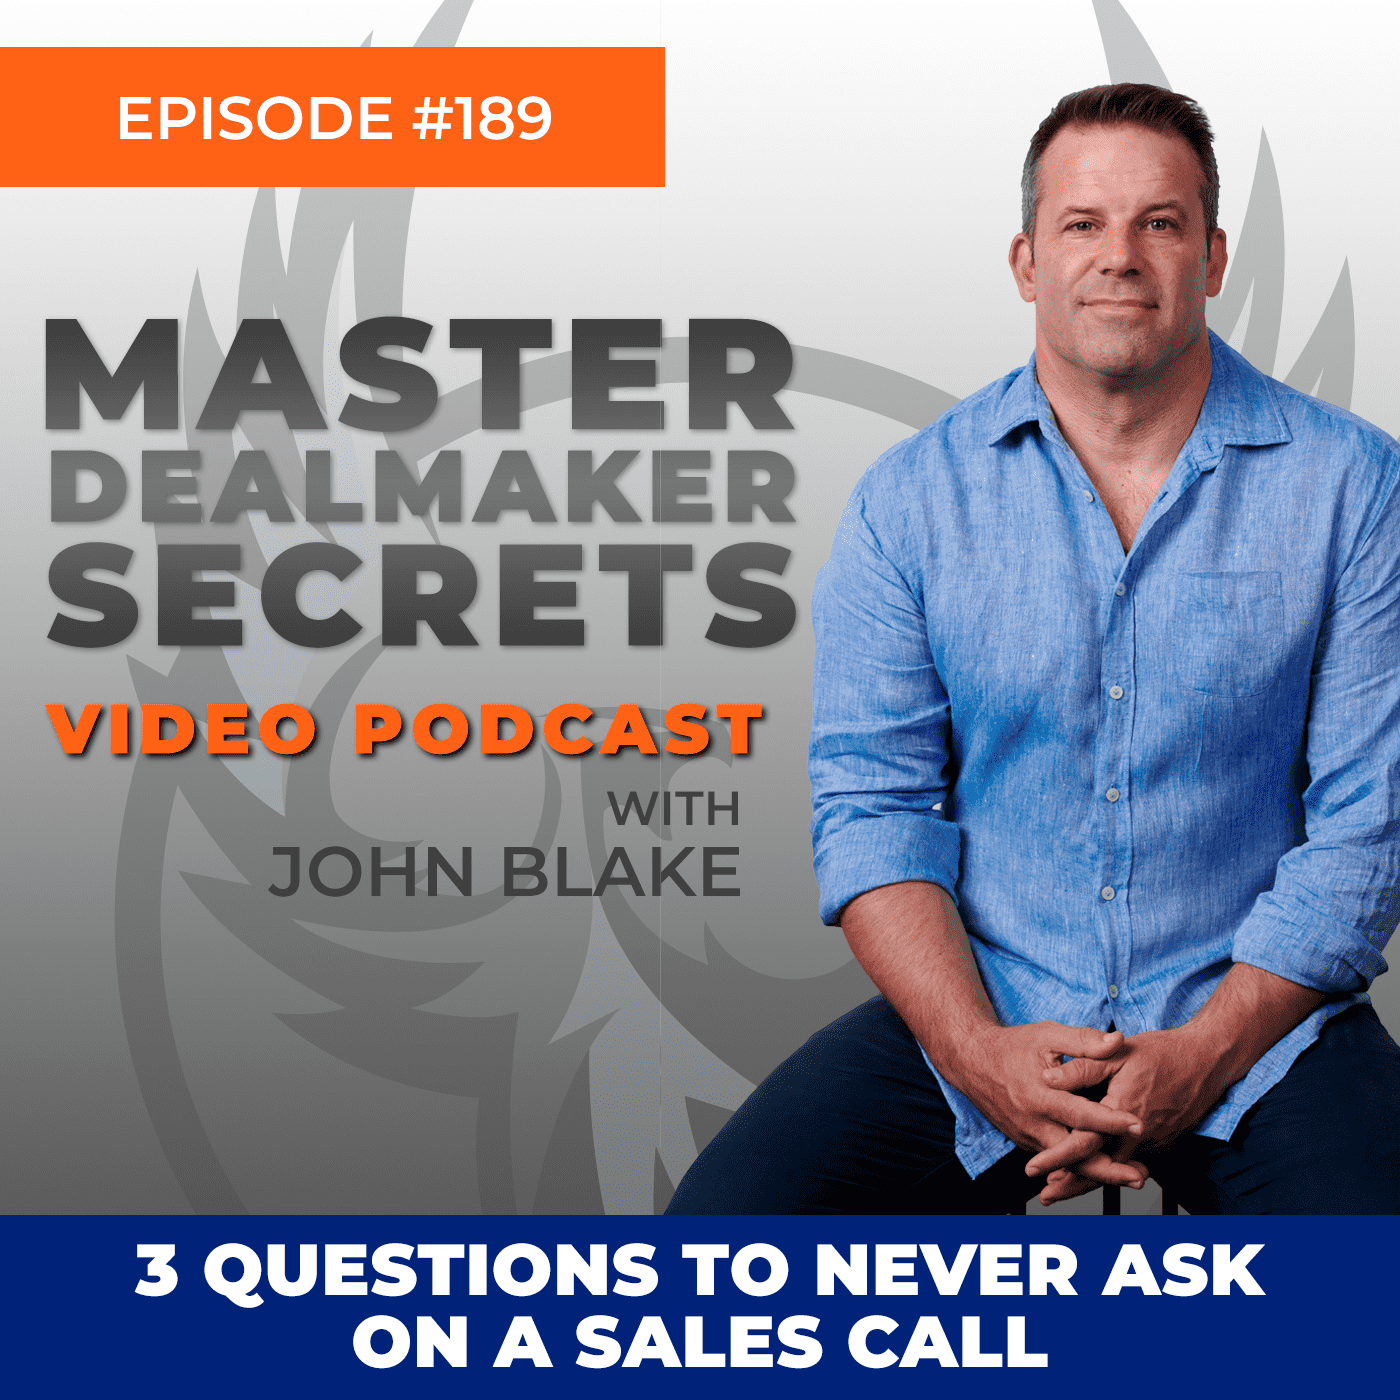 John Blake 3 Questions to Never Ask on a Sales Call